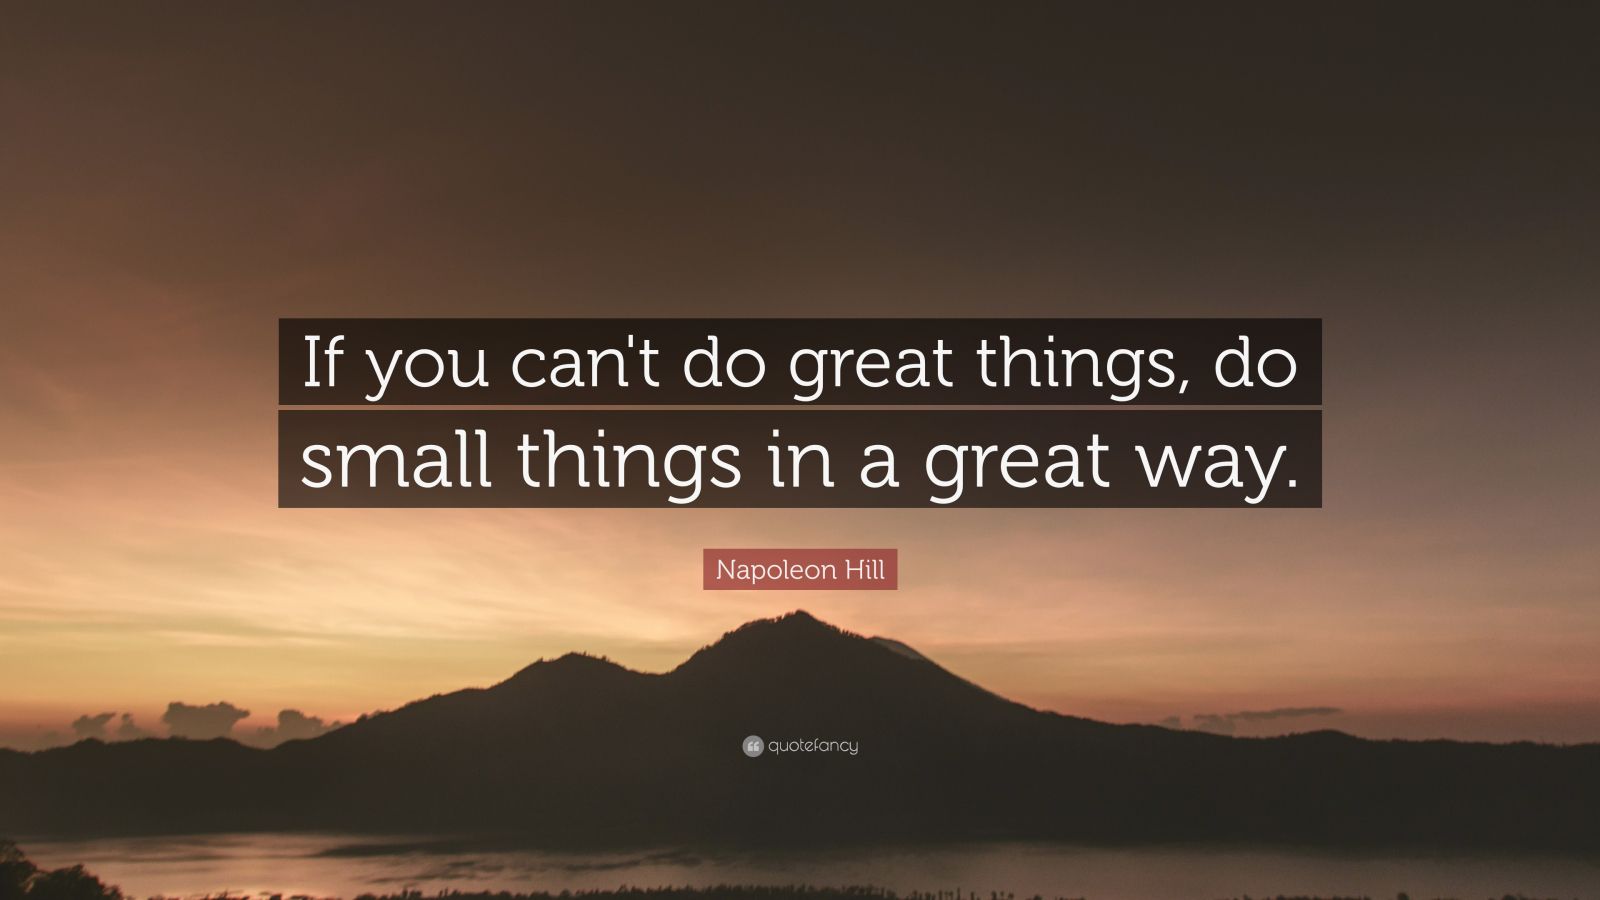 Napoleon Hill Quote: “If you can't do great things, do small things in